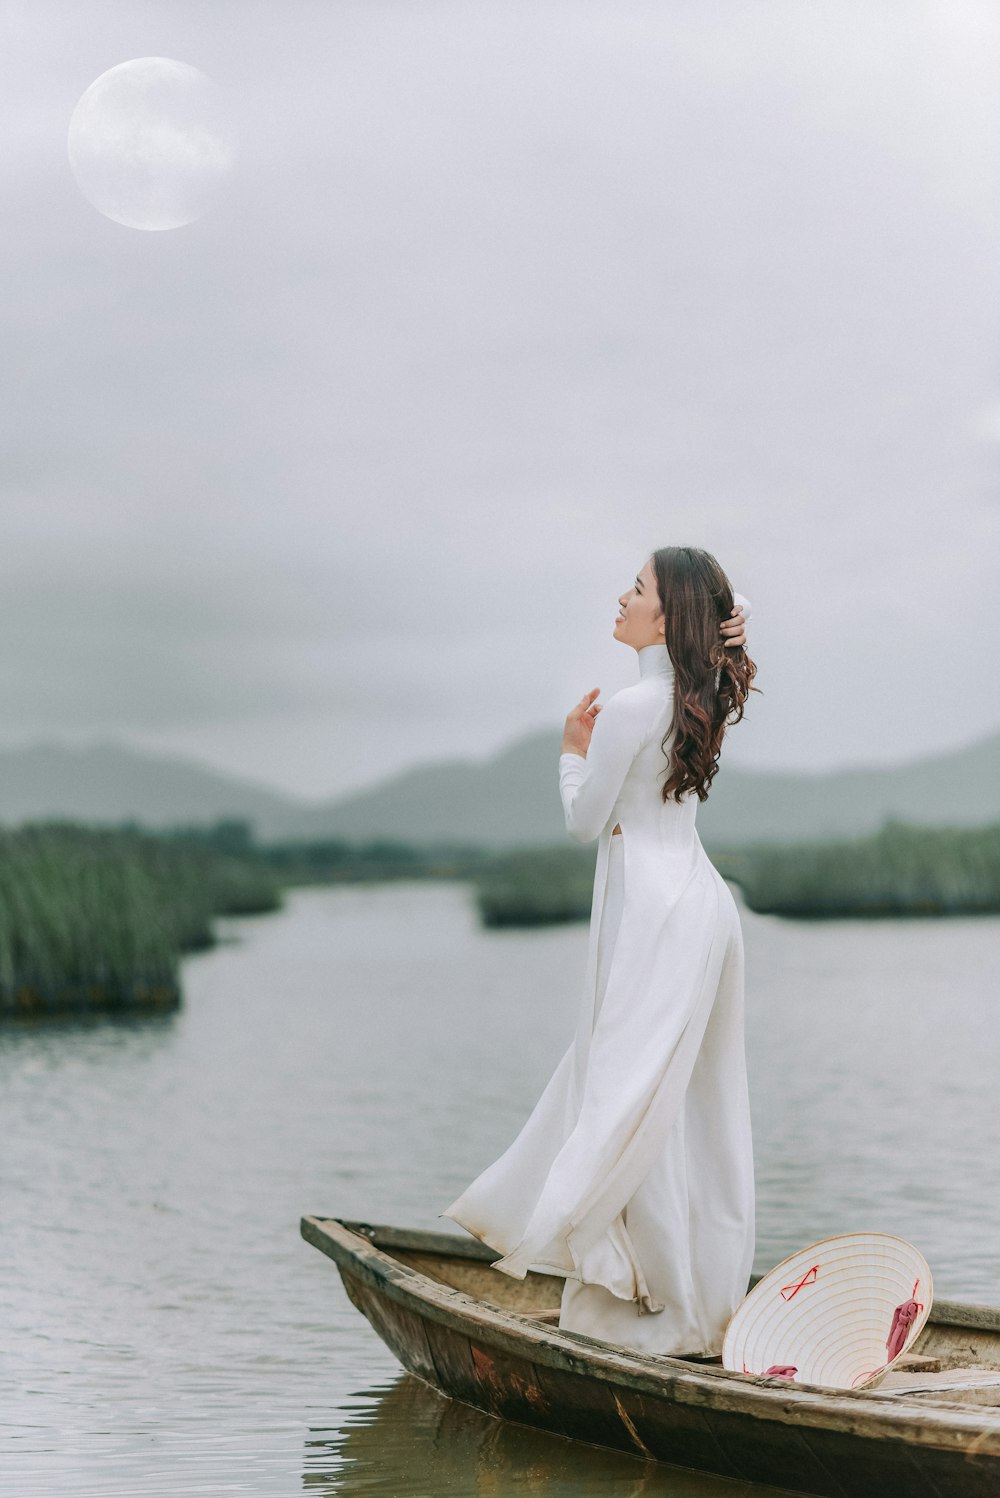 woman in white dress standing on brown wooden boat on lake during daytime